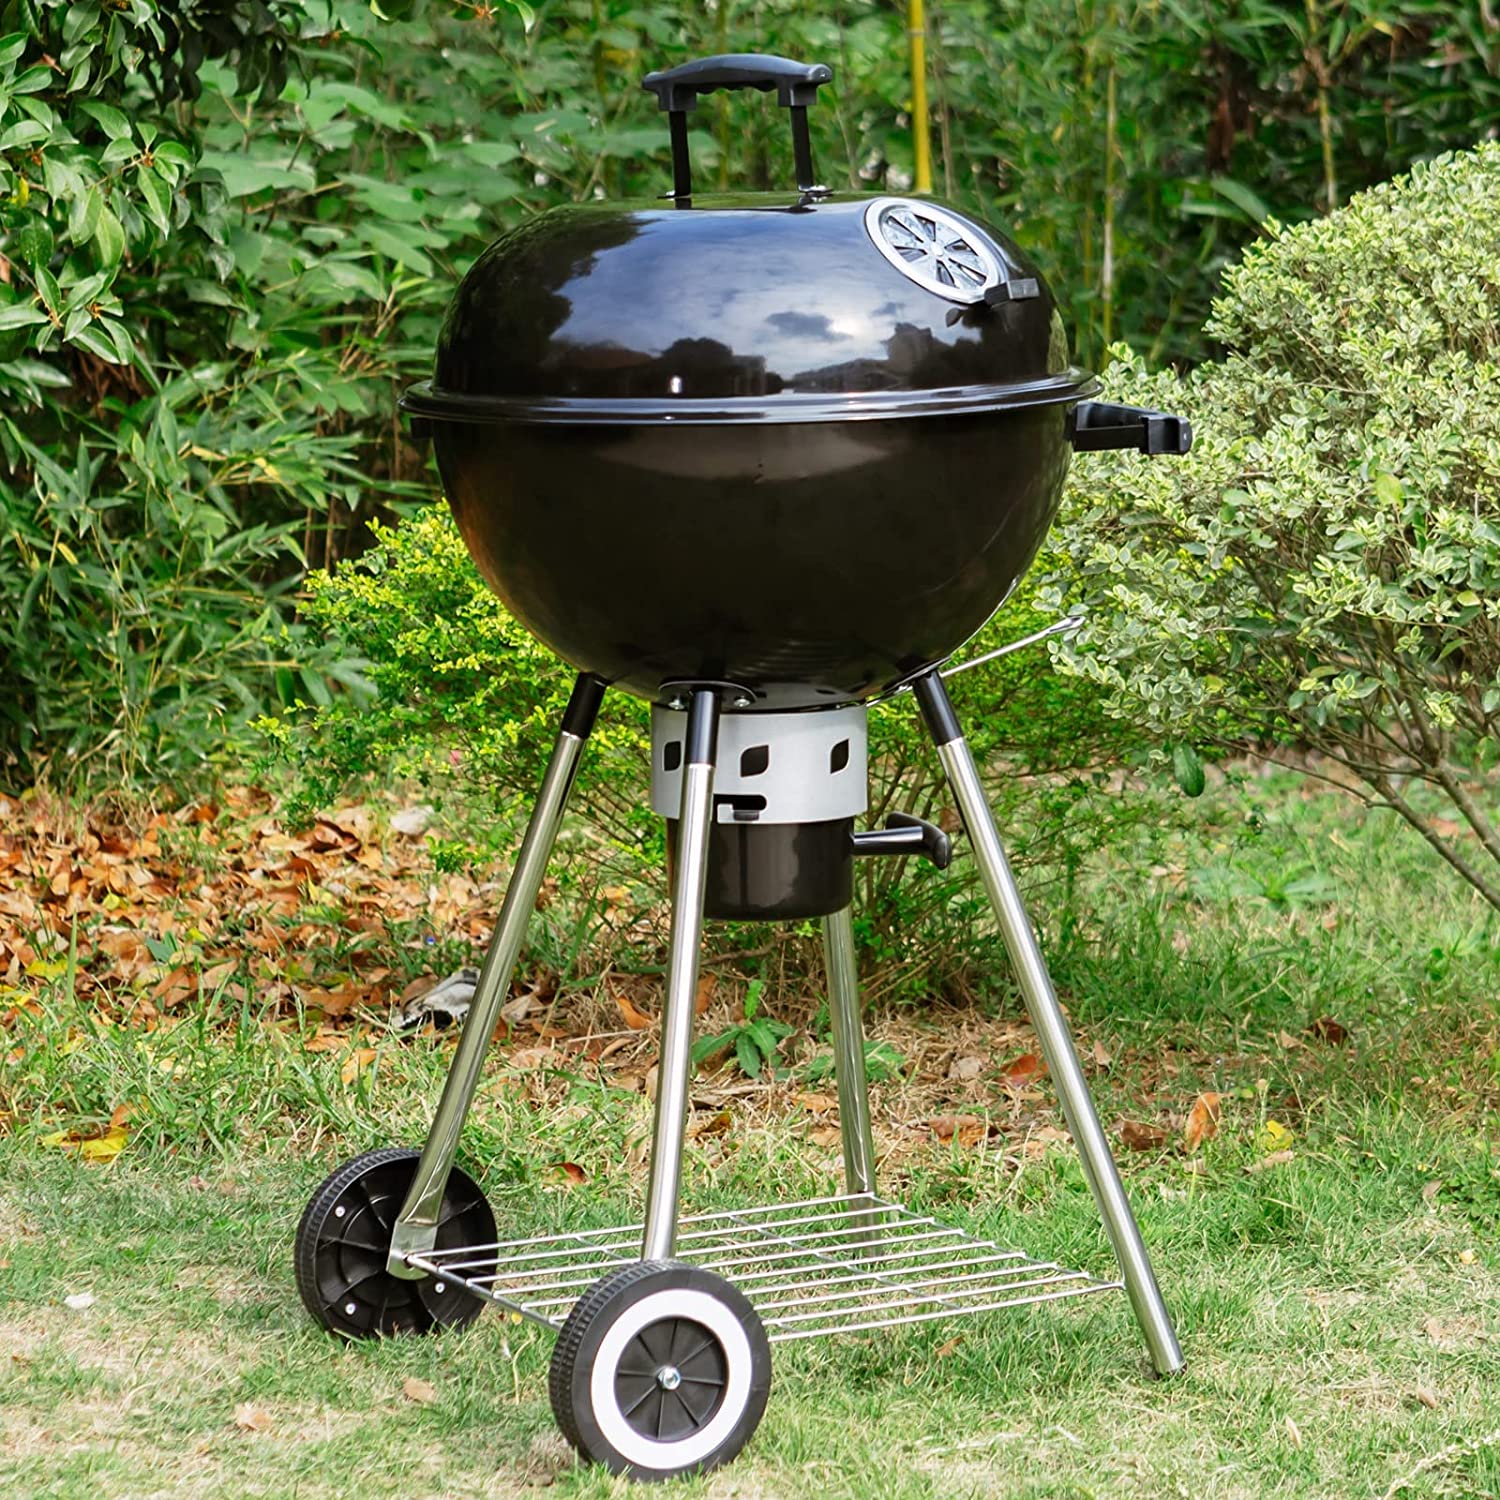 Summit Living 18" Portable Kettle Charcoal BBQ Grill, Black - image 1 of 8